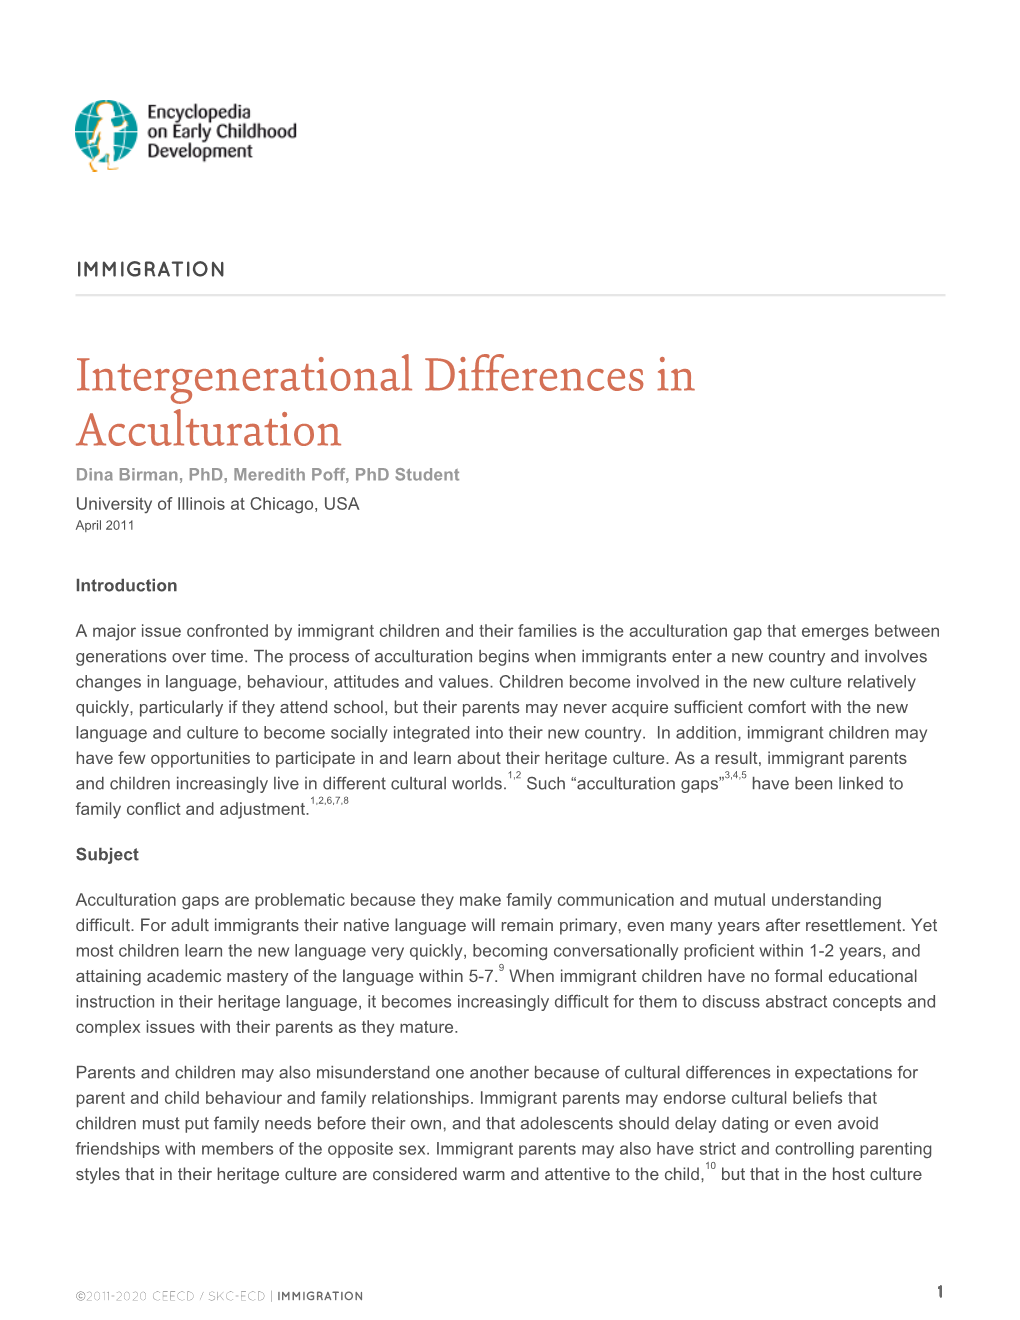 Intergenerational Differences in Acculturation Dina Birman, Phd, Meredith Poff, Phd Student University of Illinois at Chicago, USA April 2011